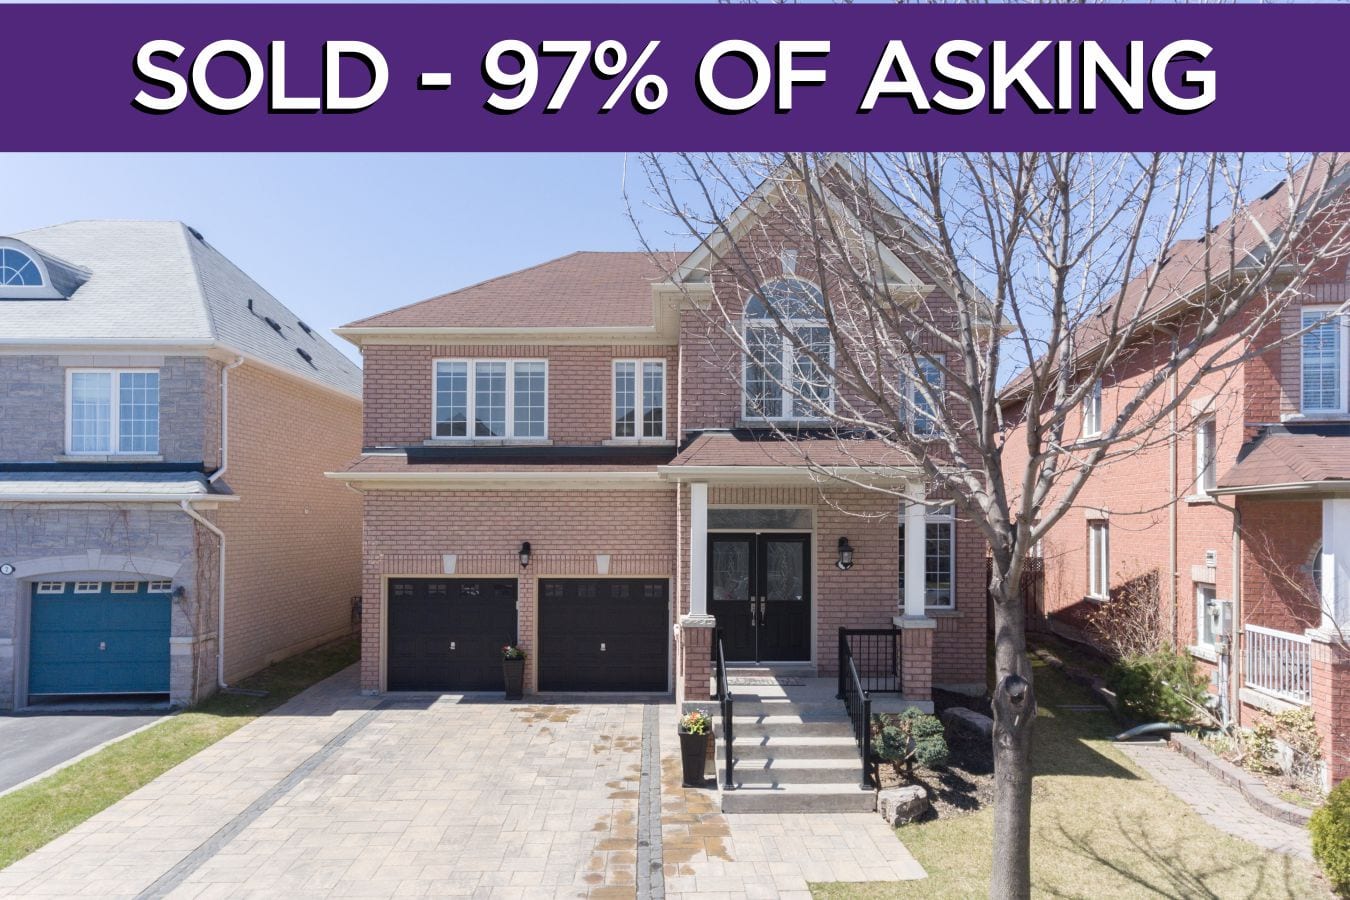 8 Wood Dale Road - Sold by Dufferin Hill 1% Real Estate Agents